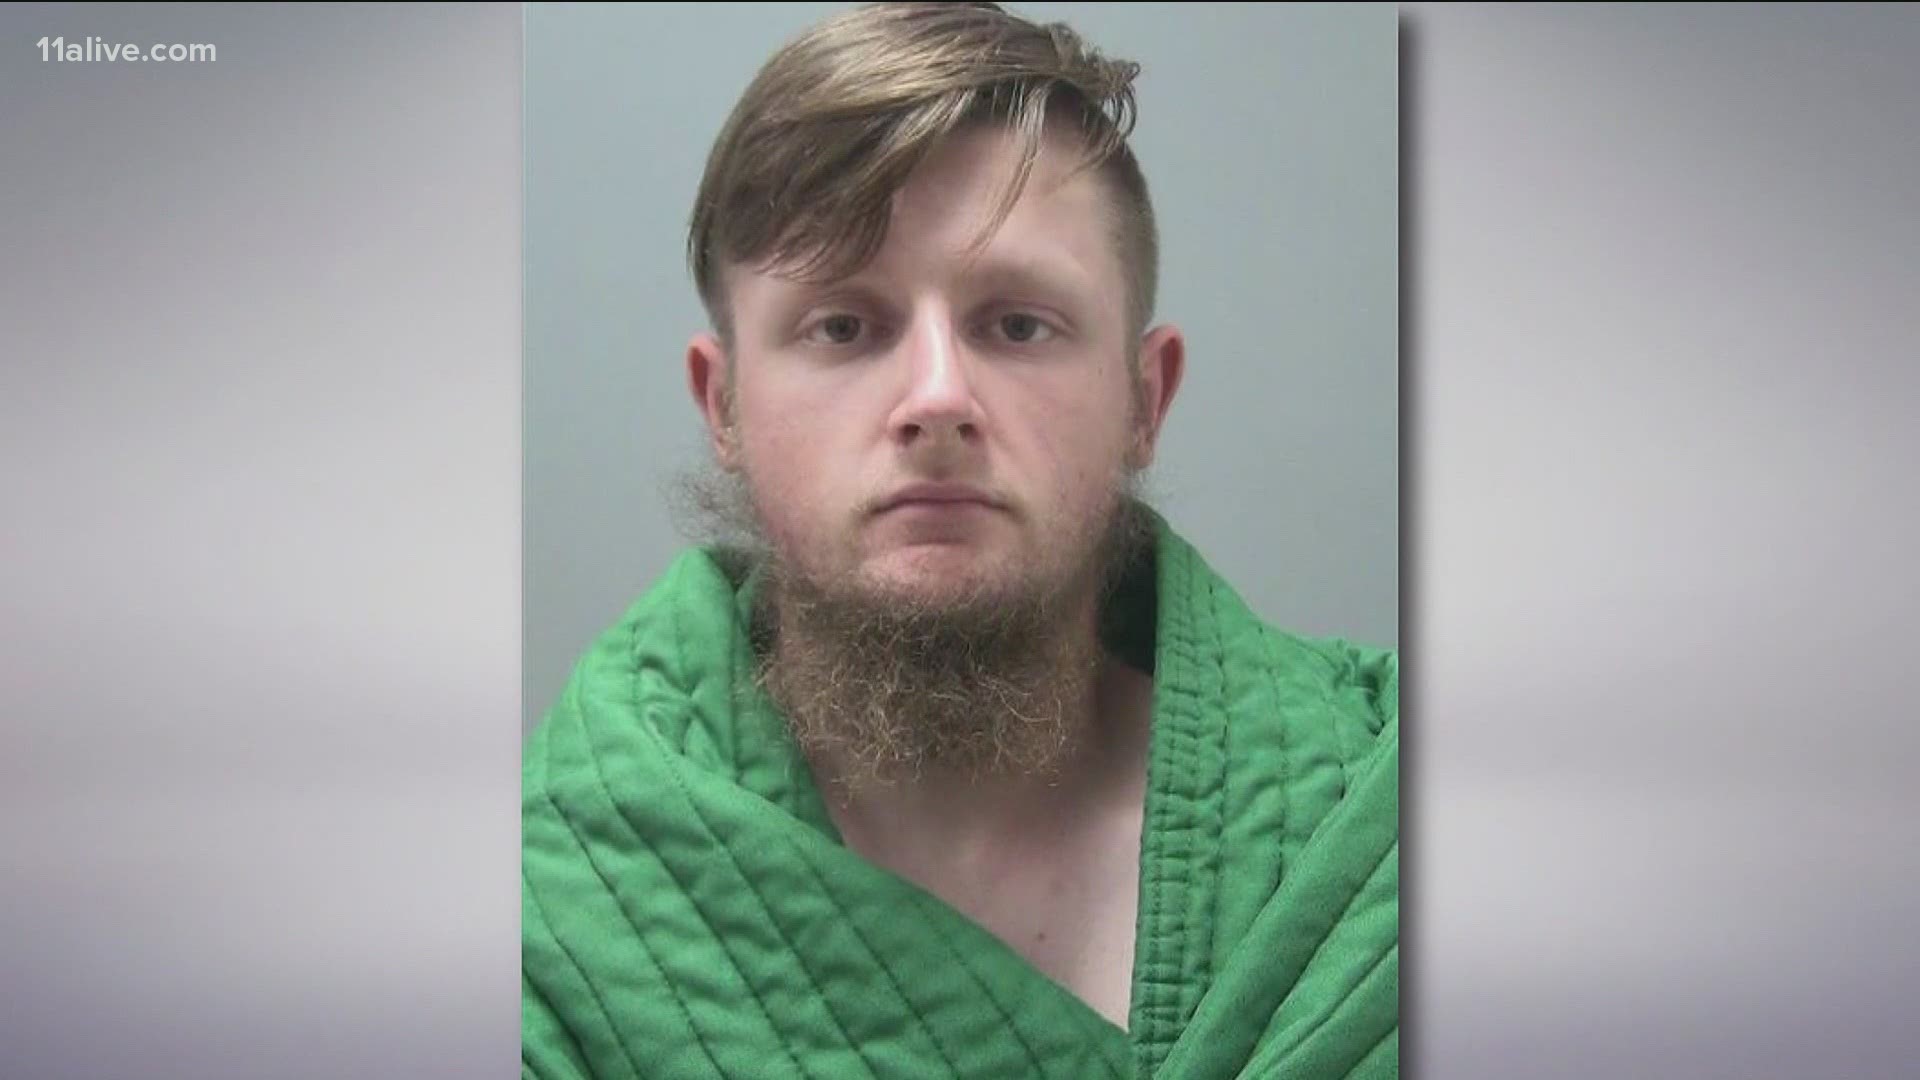 Long, a 21-year-old white man, is facing multiple charges in connection with the shootings.